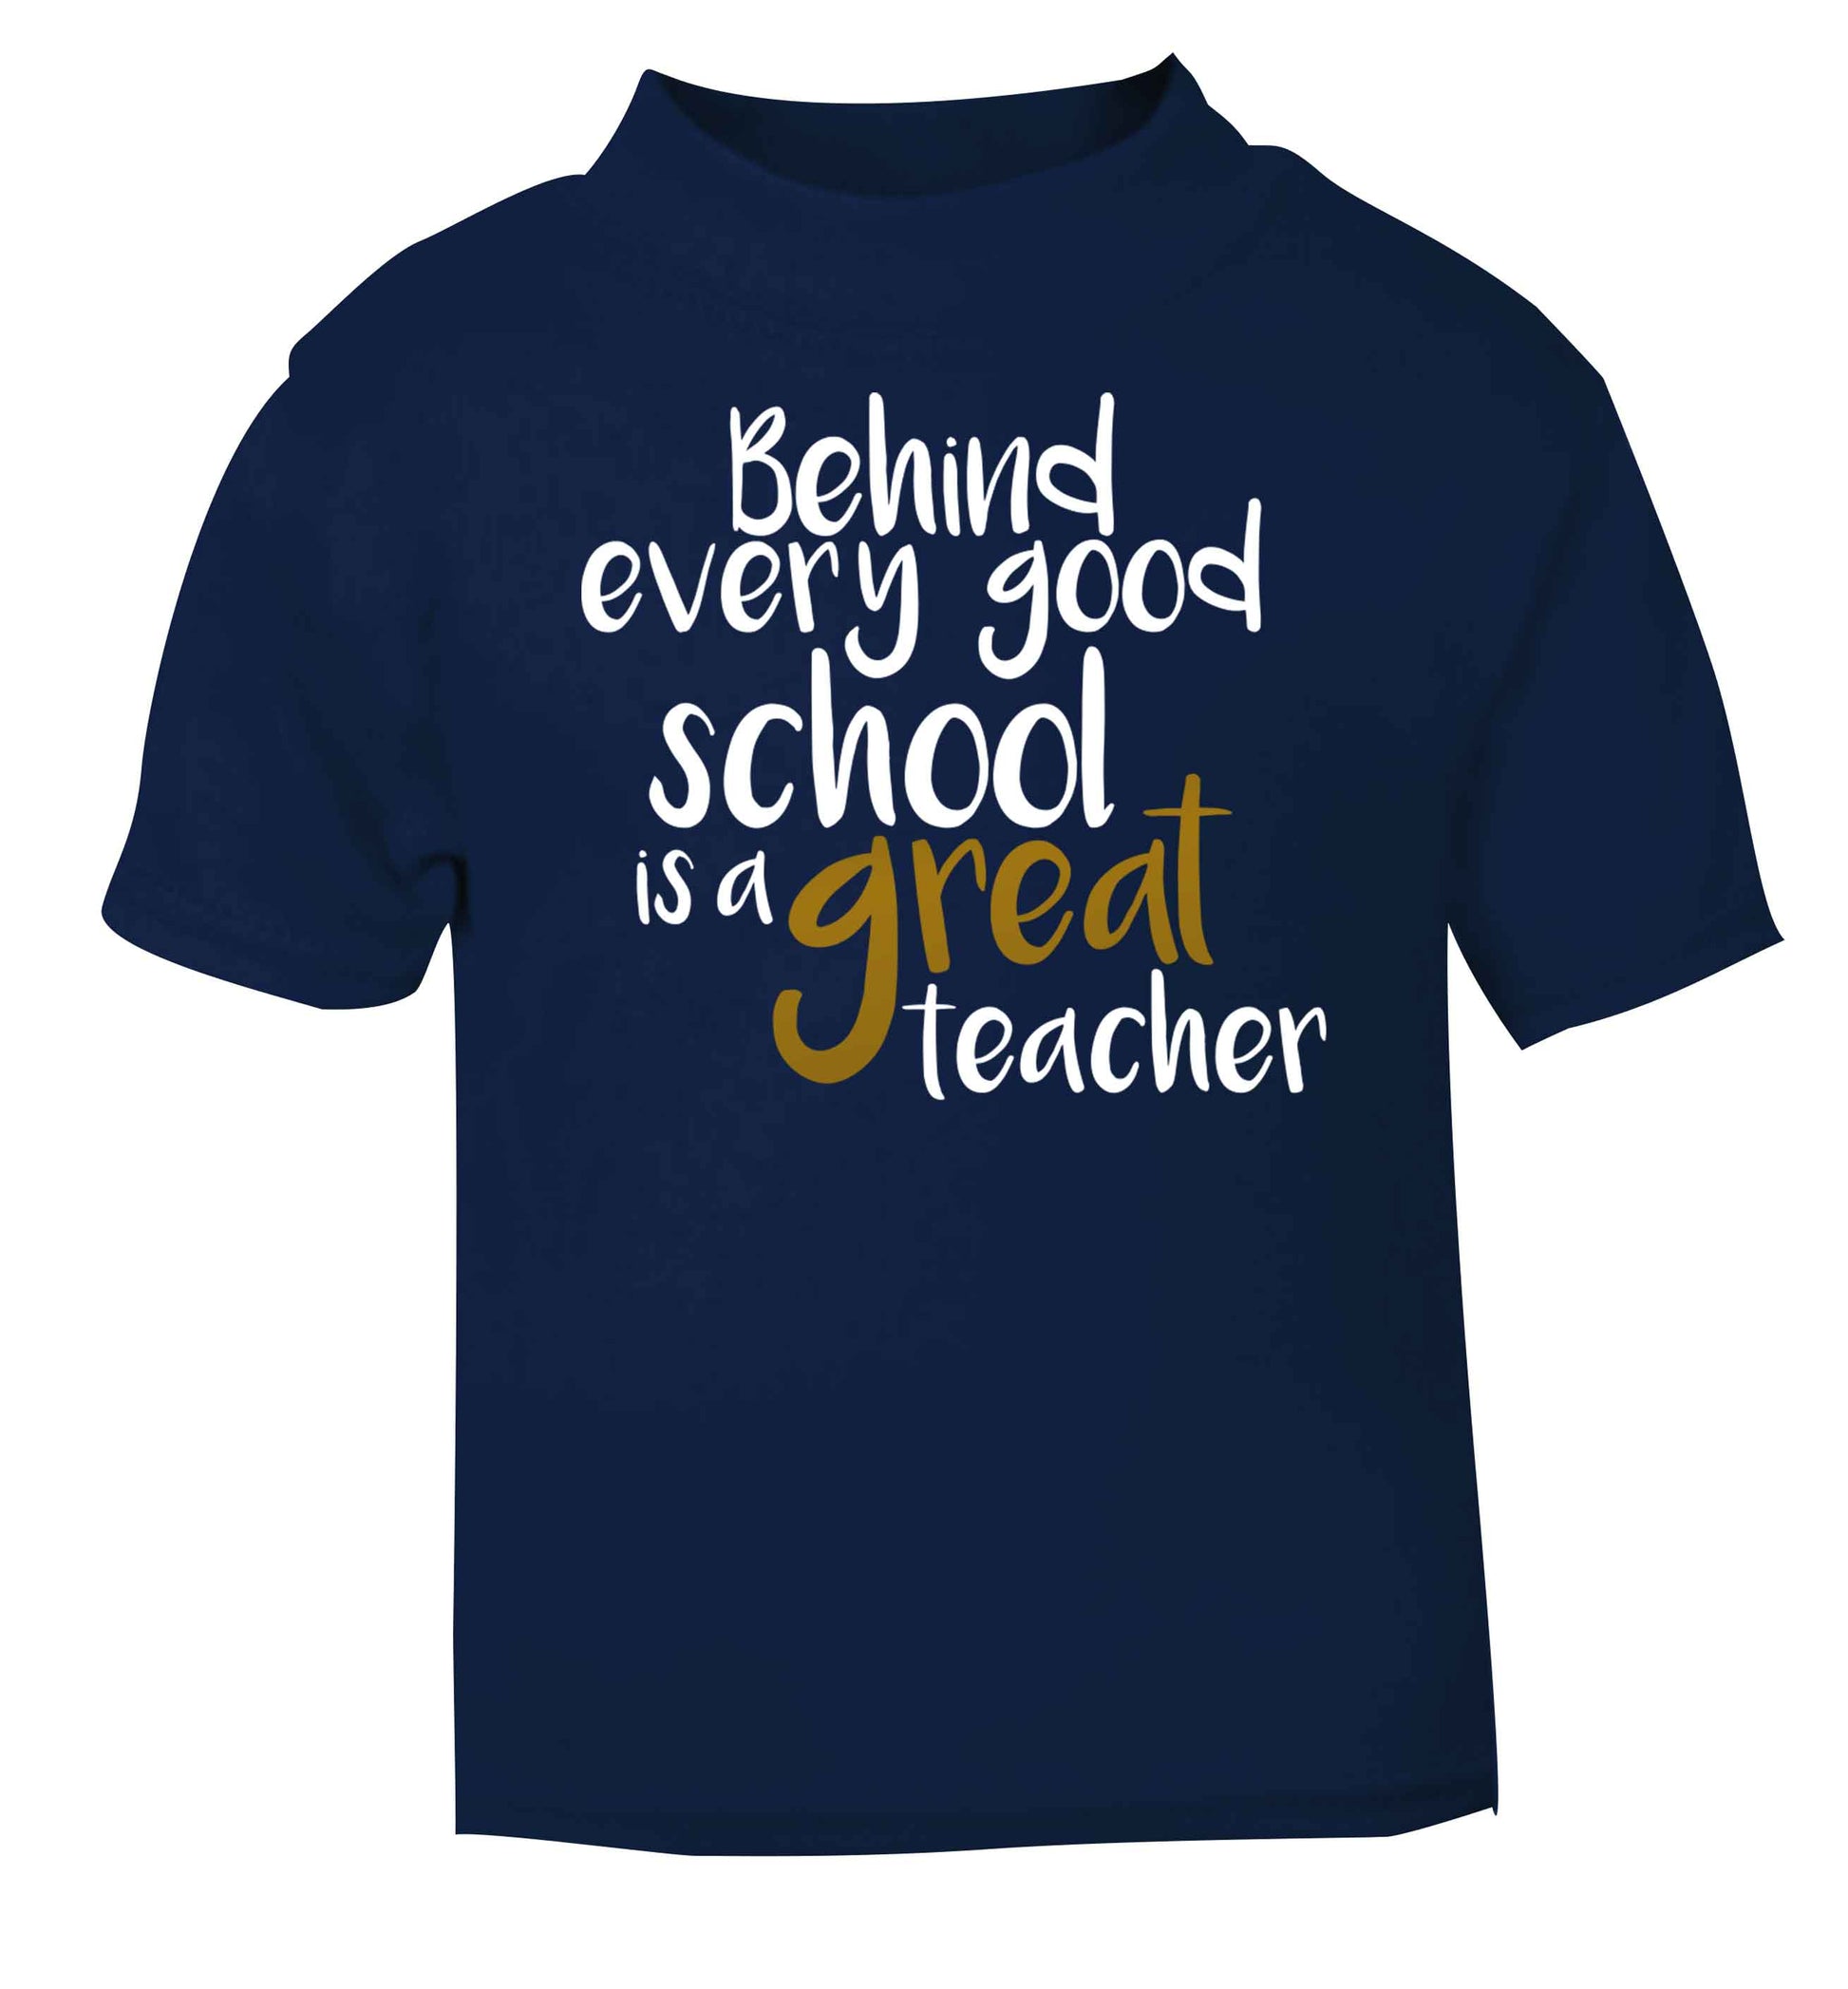 Behind every good school is a great teacher navy baby toddler Tshirt 2 Years